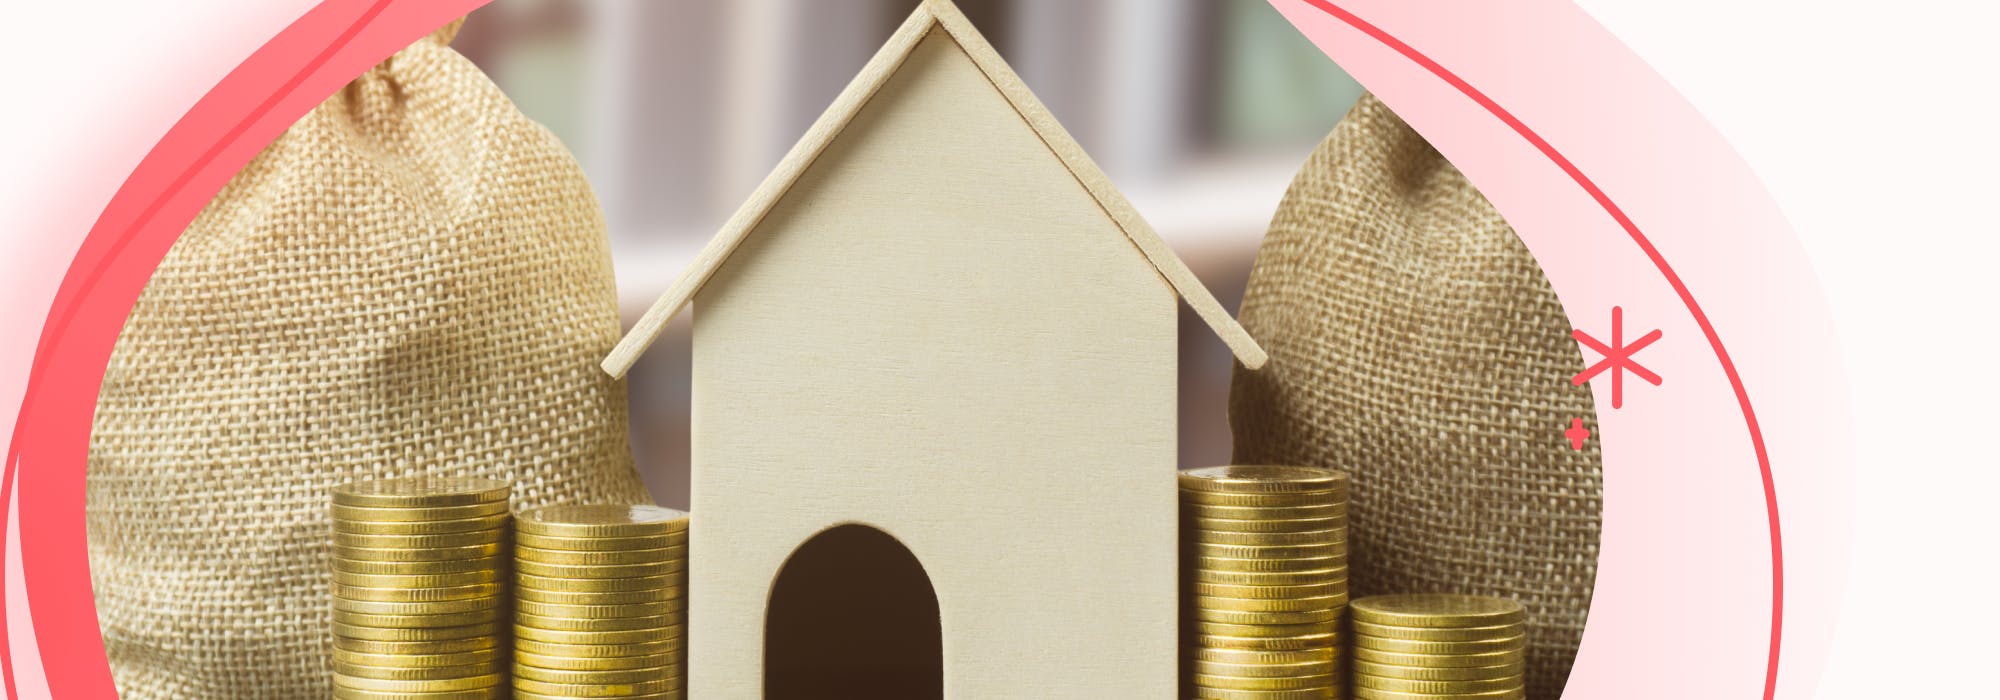 Using equity and saving money for property investment 